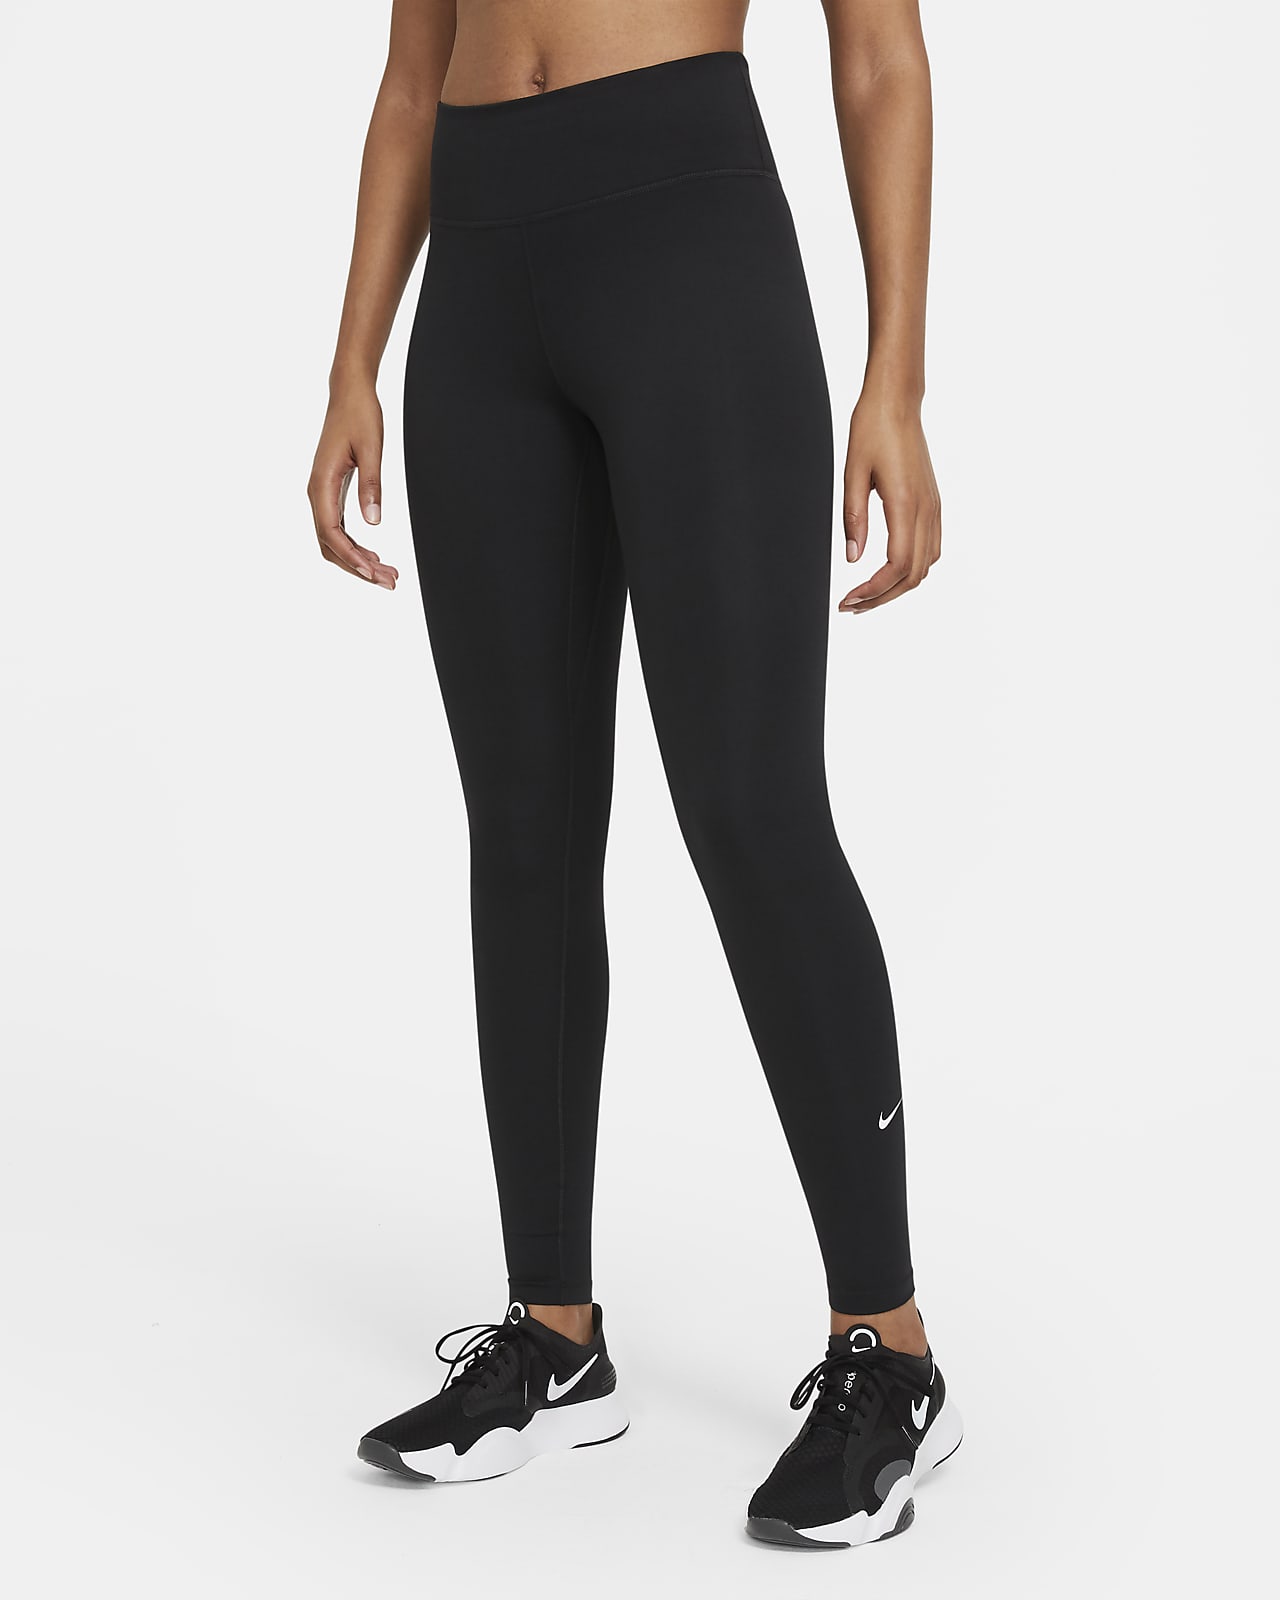 https://static.nike.com/a/images/t_PDP_1280_v1/f_auto,q_auto:eco/0aad23e7-2373-4622-81f4-780e44c4d3ee/one-legging-met-halfhoge-taille-dames-VCXzqM.png